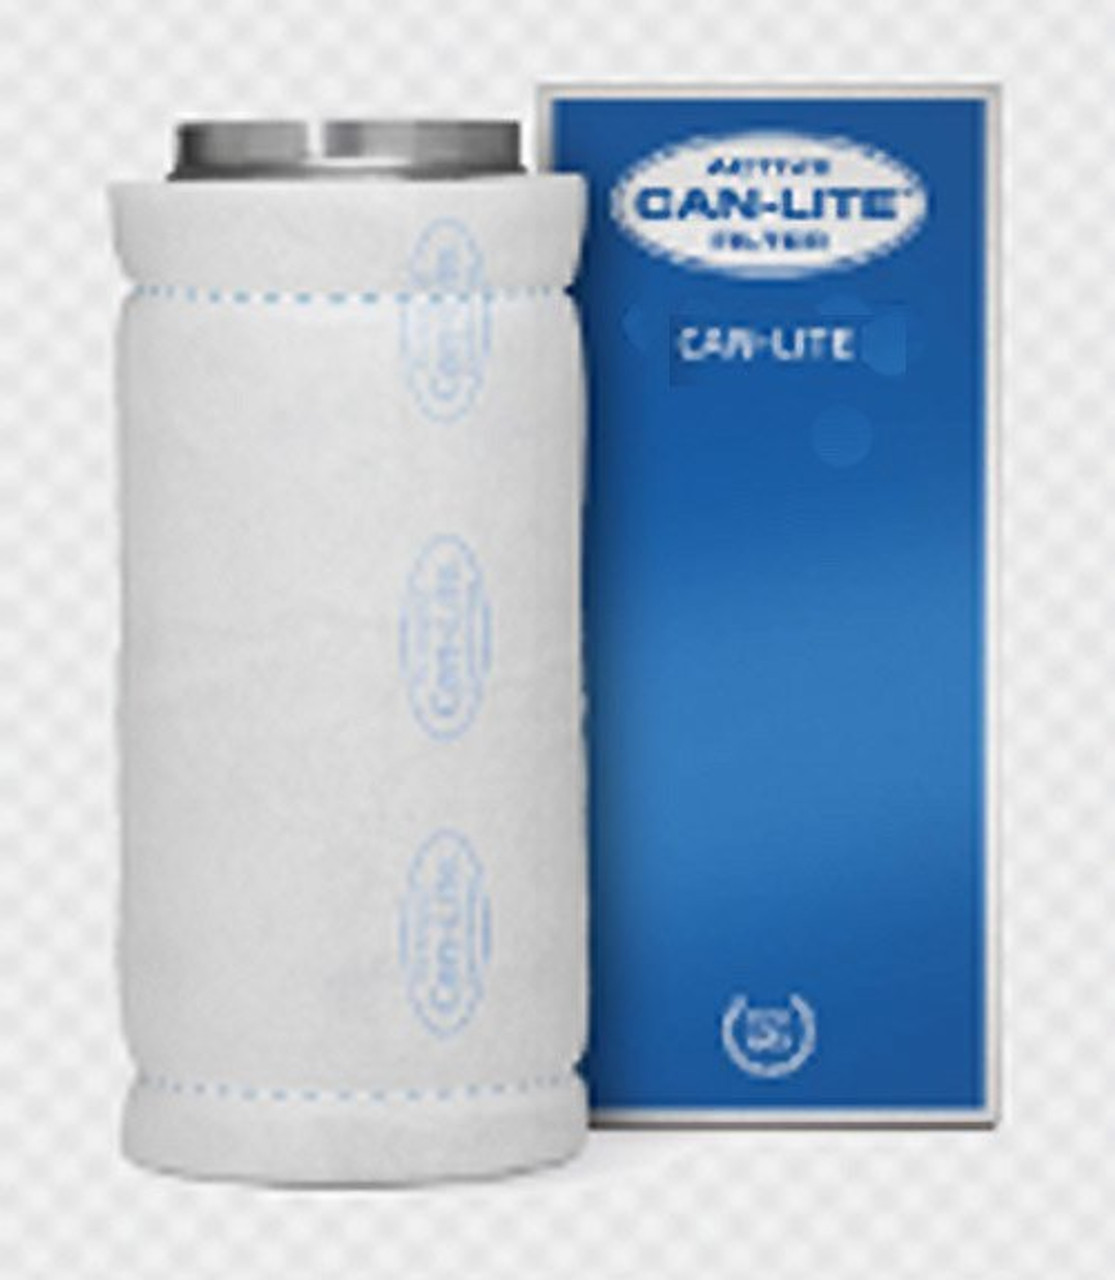 CAN-LITE FILTER 1000 CARBON